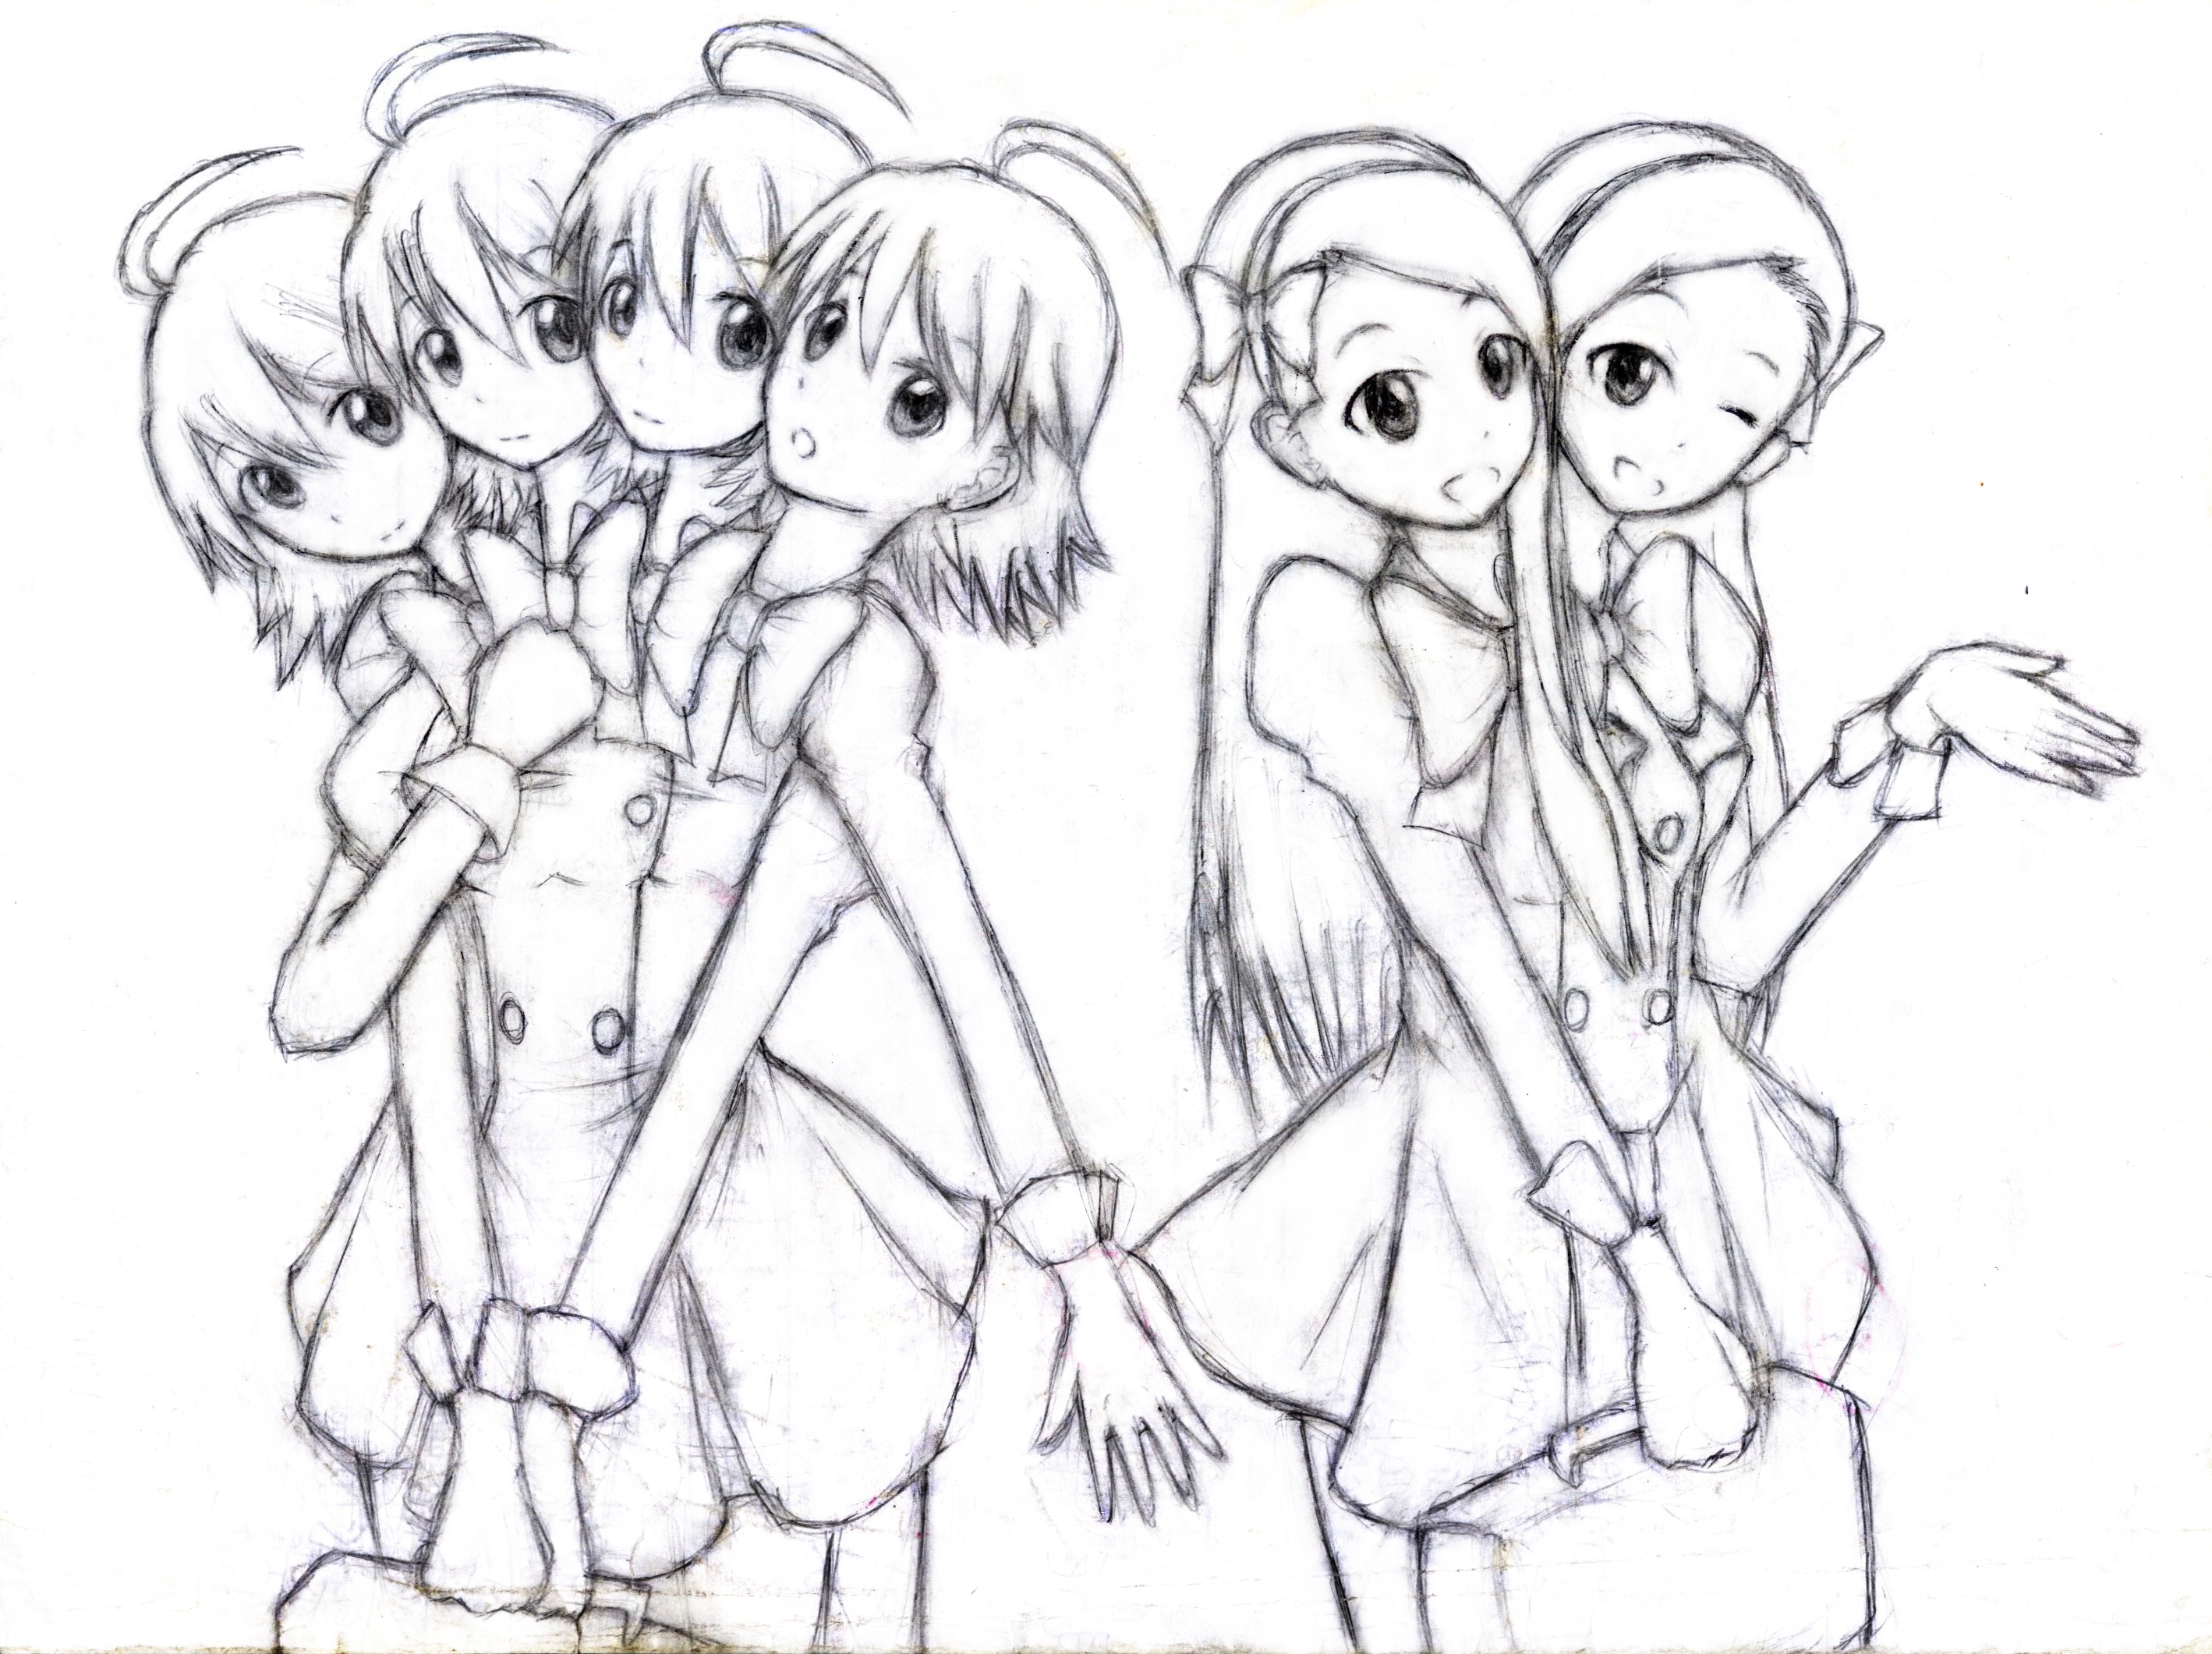 4 Headed Miki And 2 Iori By Jim830928 On DeviantArt.